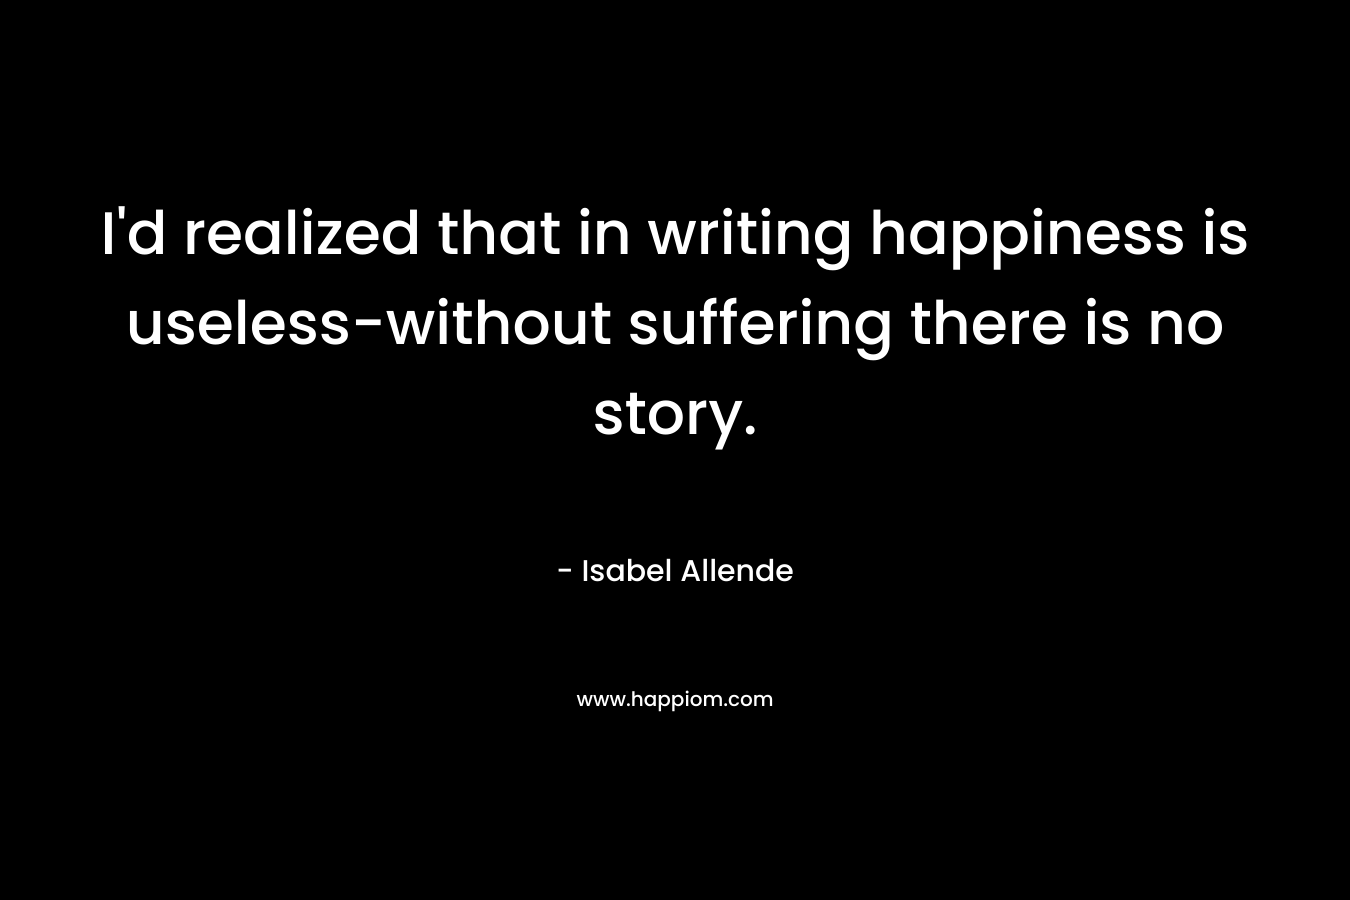 I’d realized that in writing happiness is useless-without suffering there is no story. – Isabel Allende